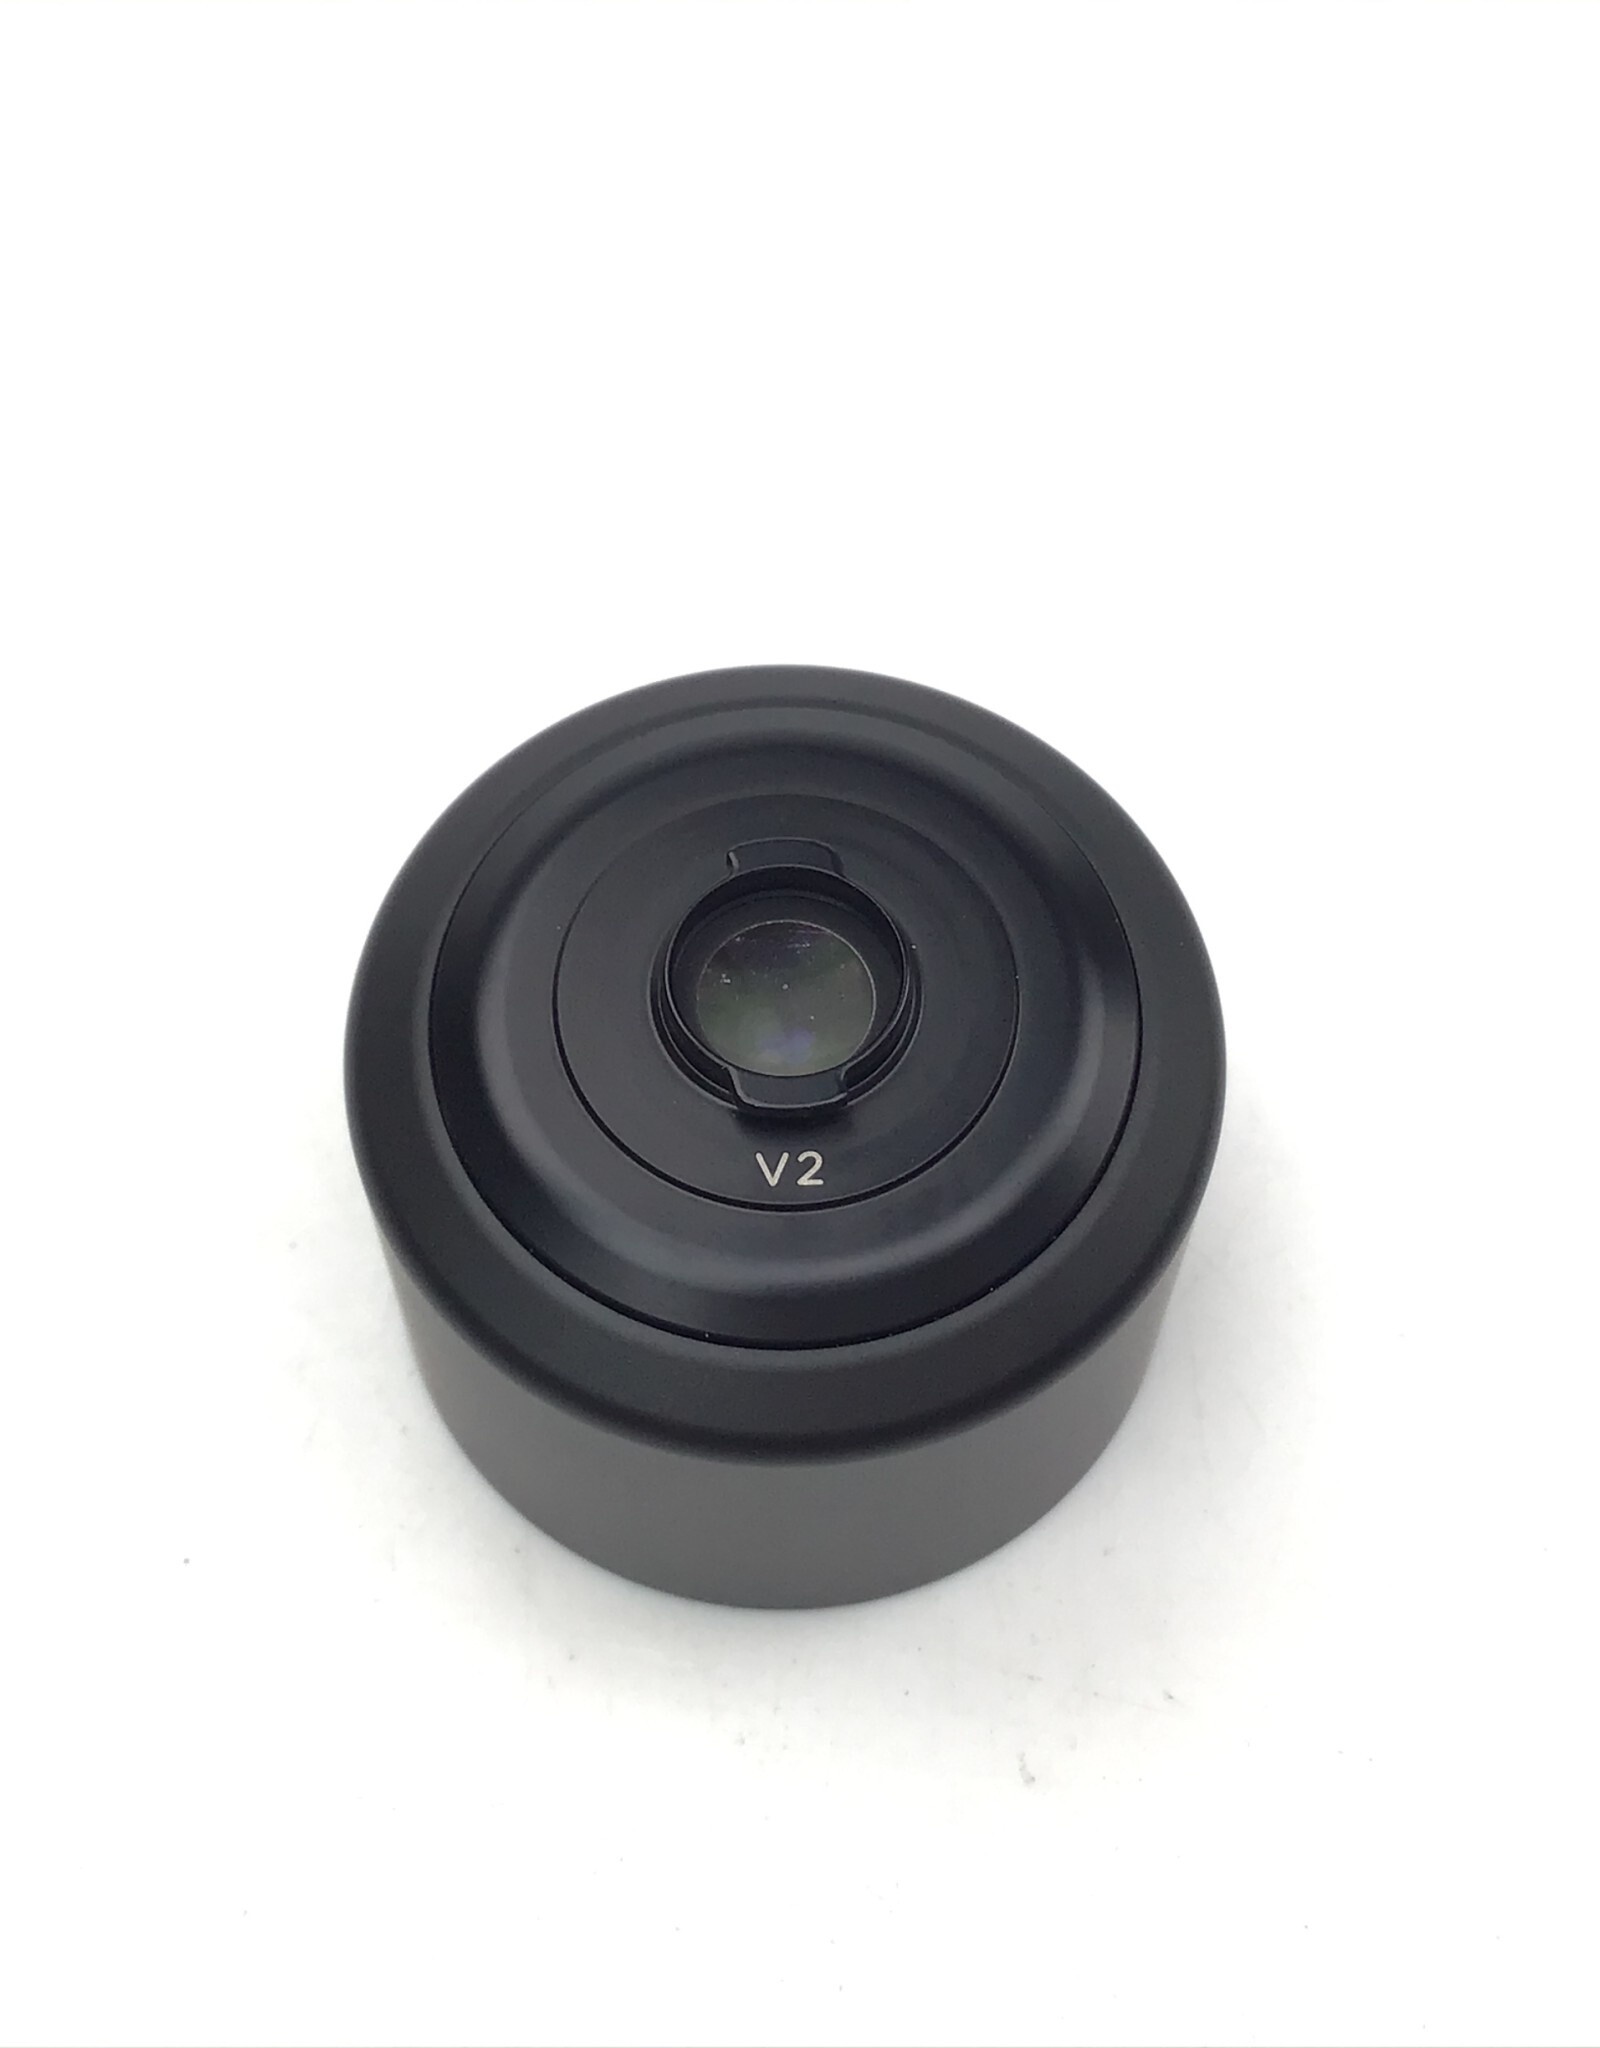 Moment Lens Set for Phone 60mm, Superfish 170, 18mm Wide Used Good